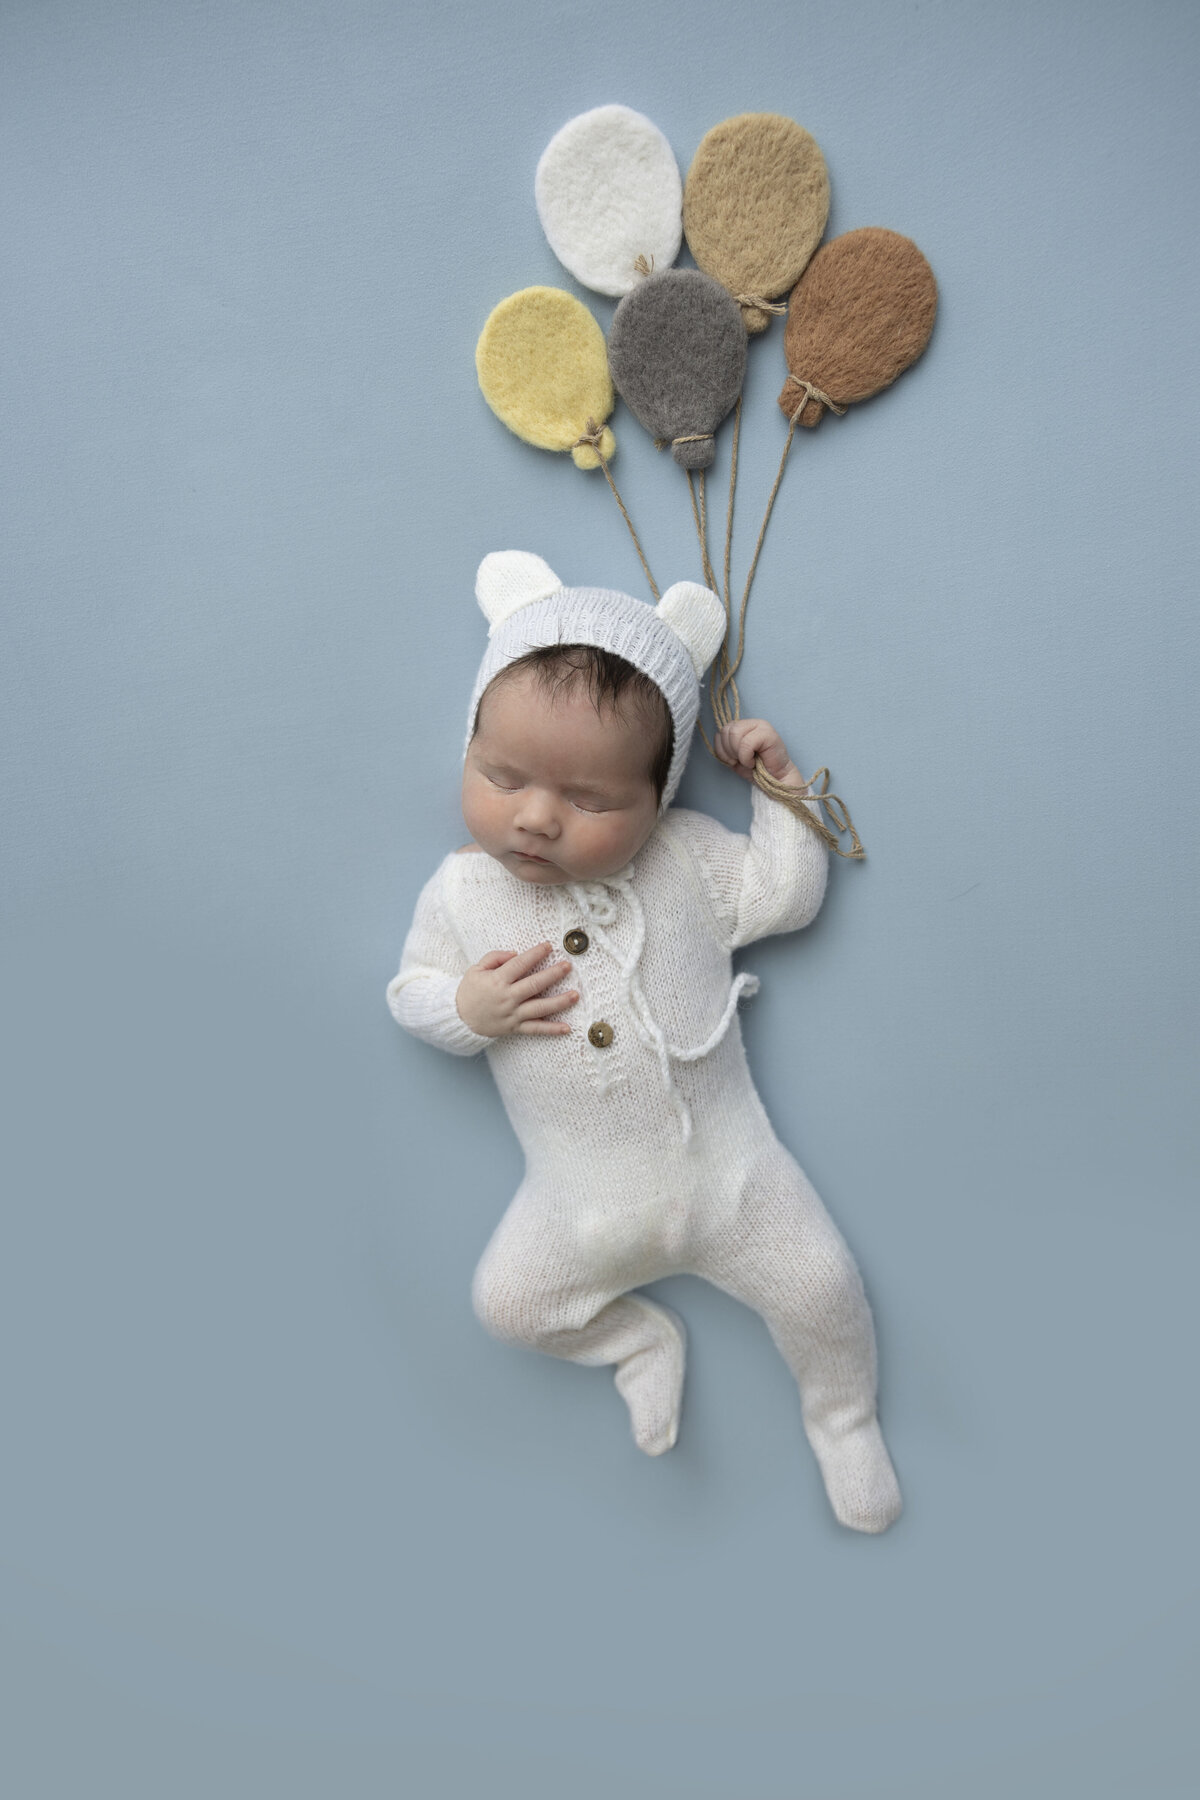 Baby in bear outfit holds onto a bundle of balloons.